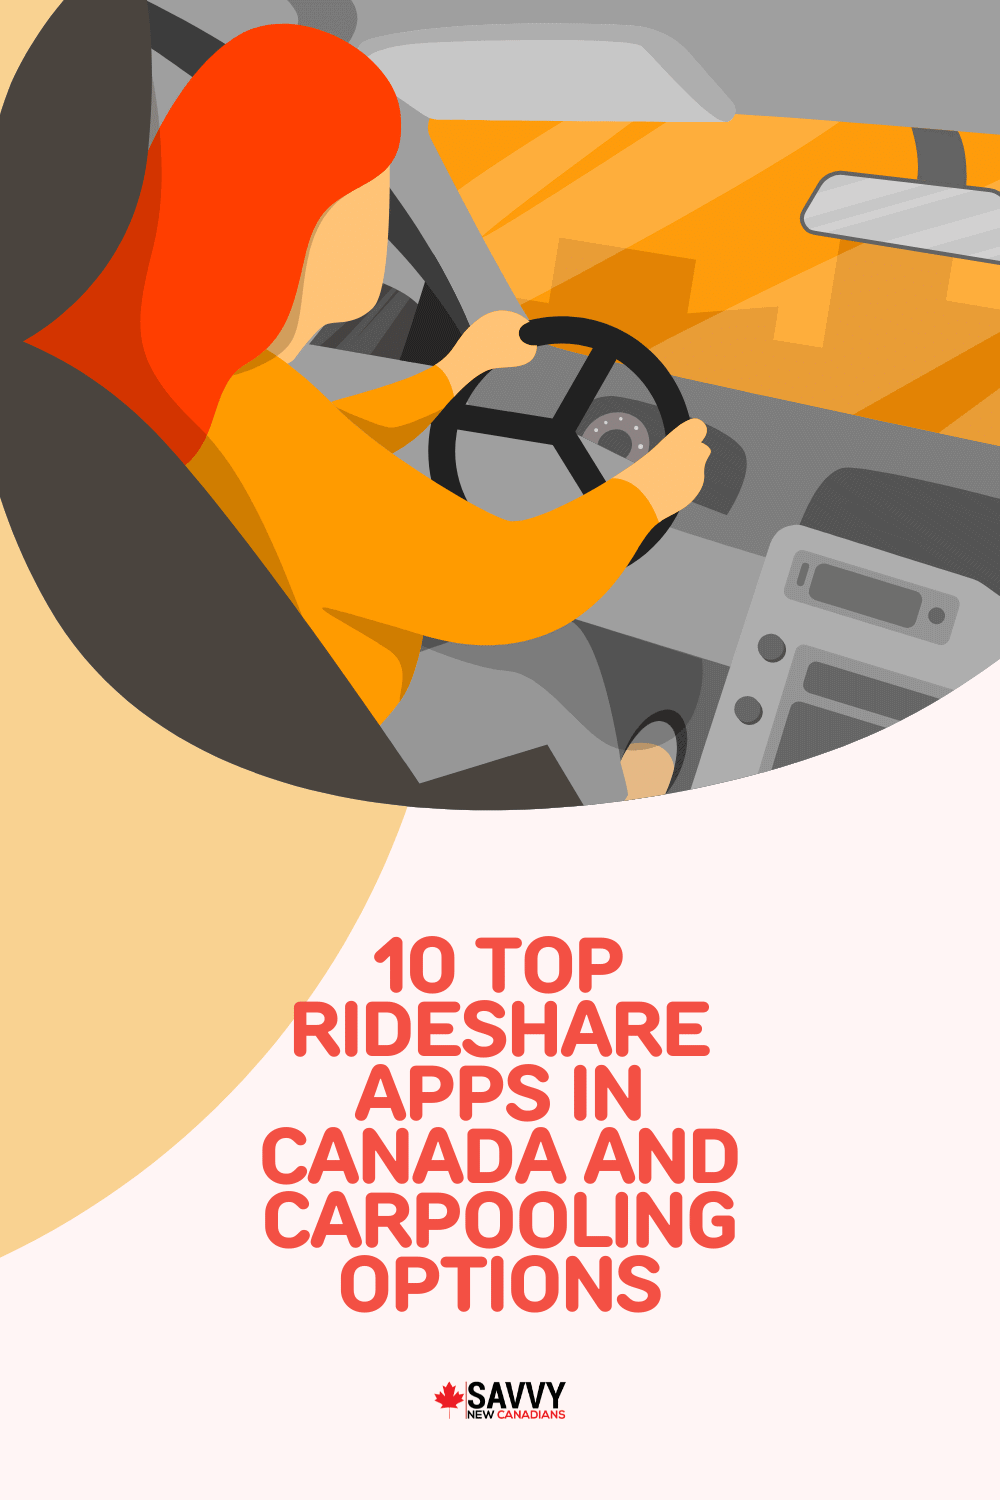 10 Top Rideshare Apps in Canada and Carpooling Options (2022)